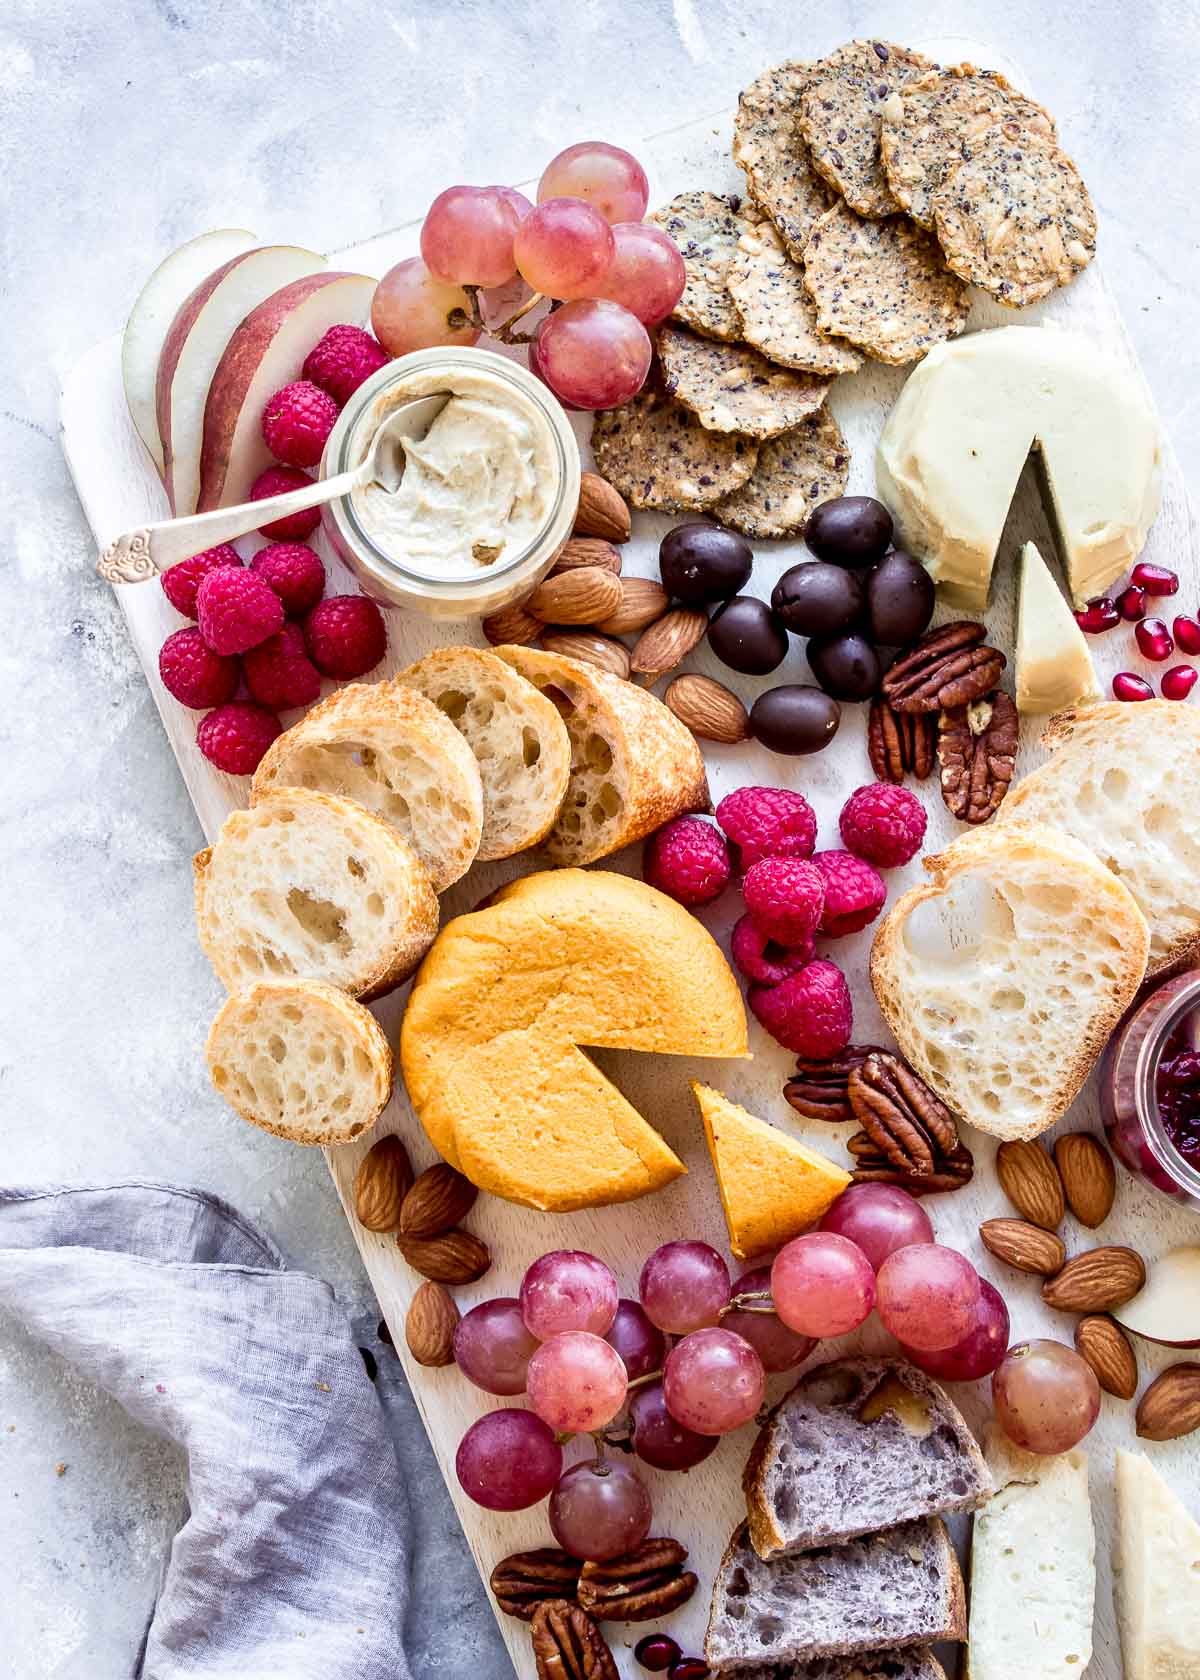 Partial vegan cheese board with cheeses, berries, bread and crackers.